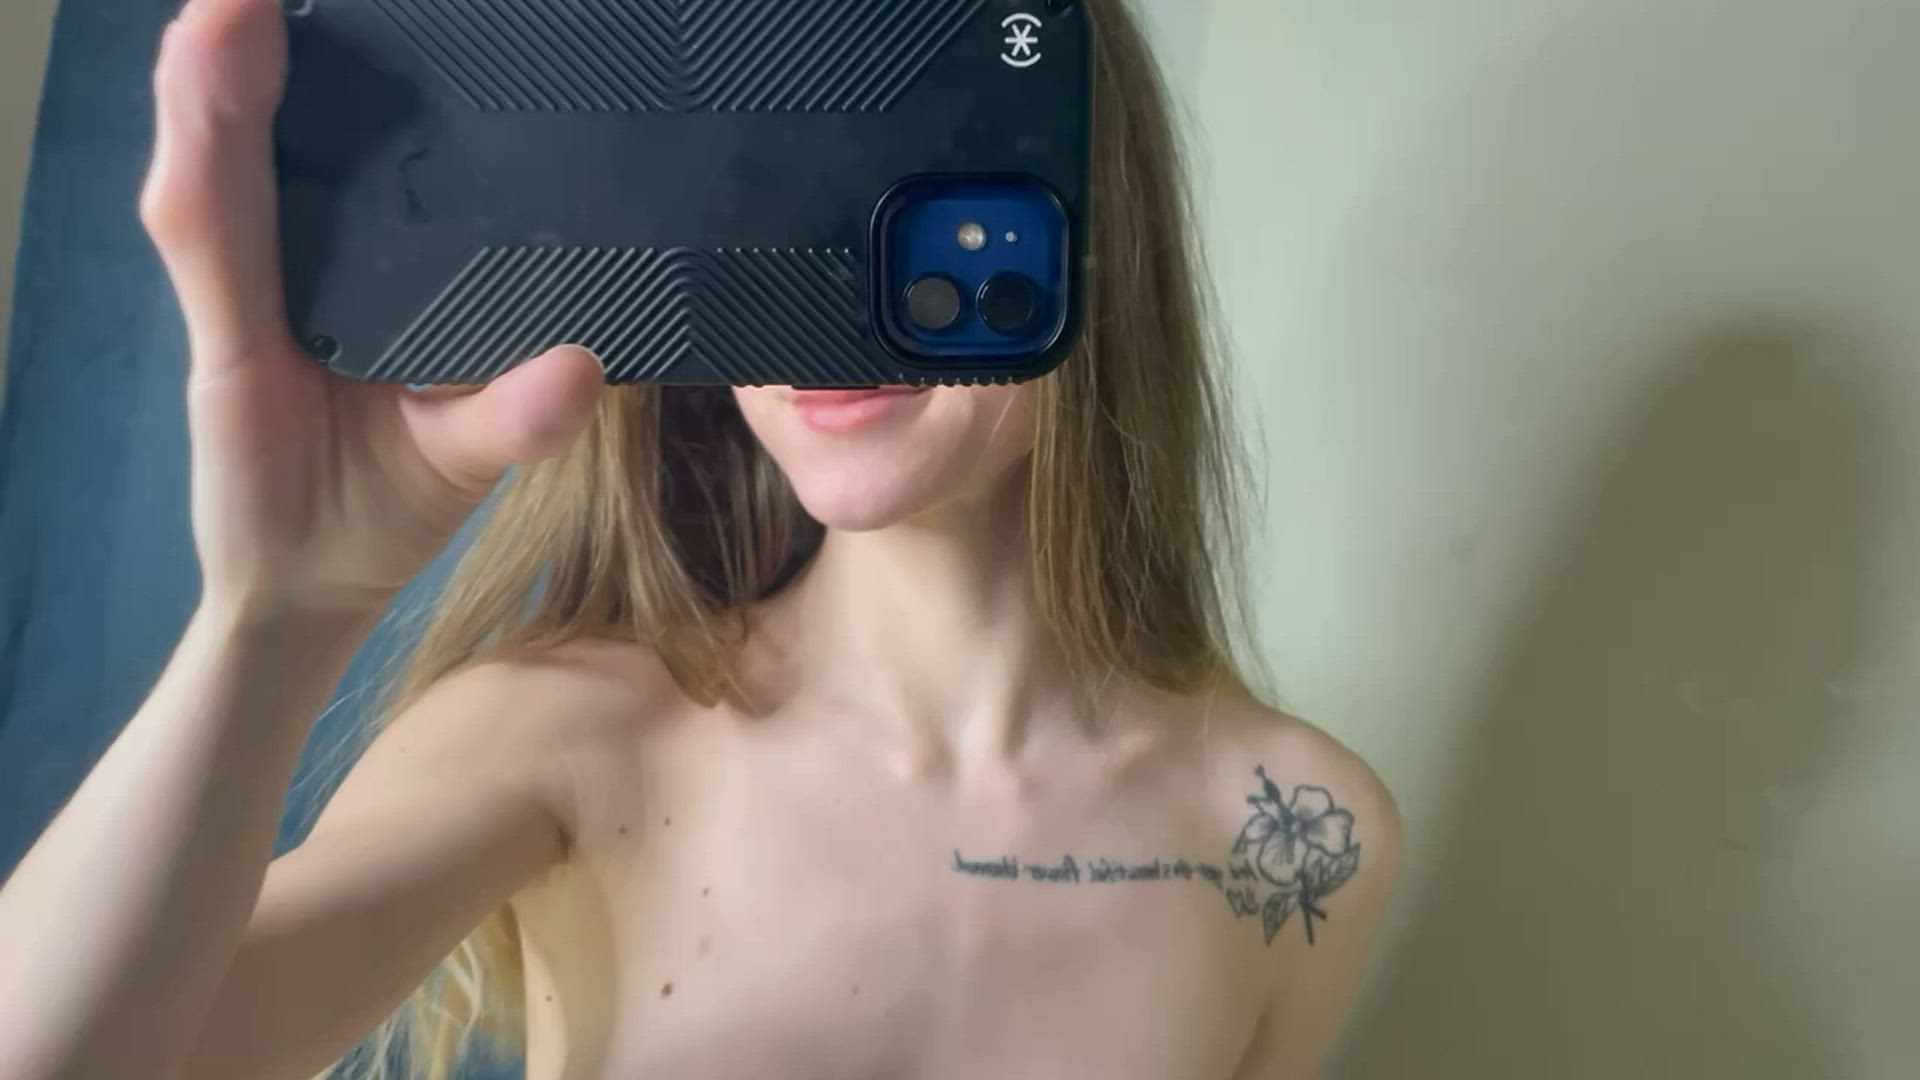 Tits porn video with onlyfans model acaciaeileen <strong>@acaciaeileen</strong>